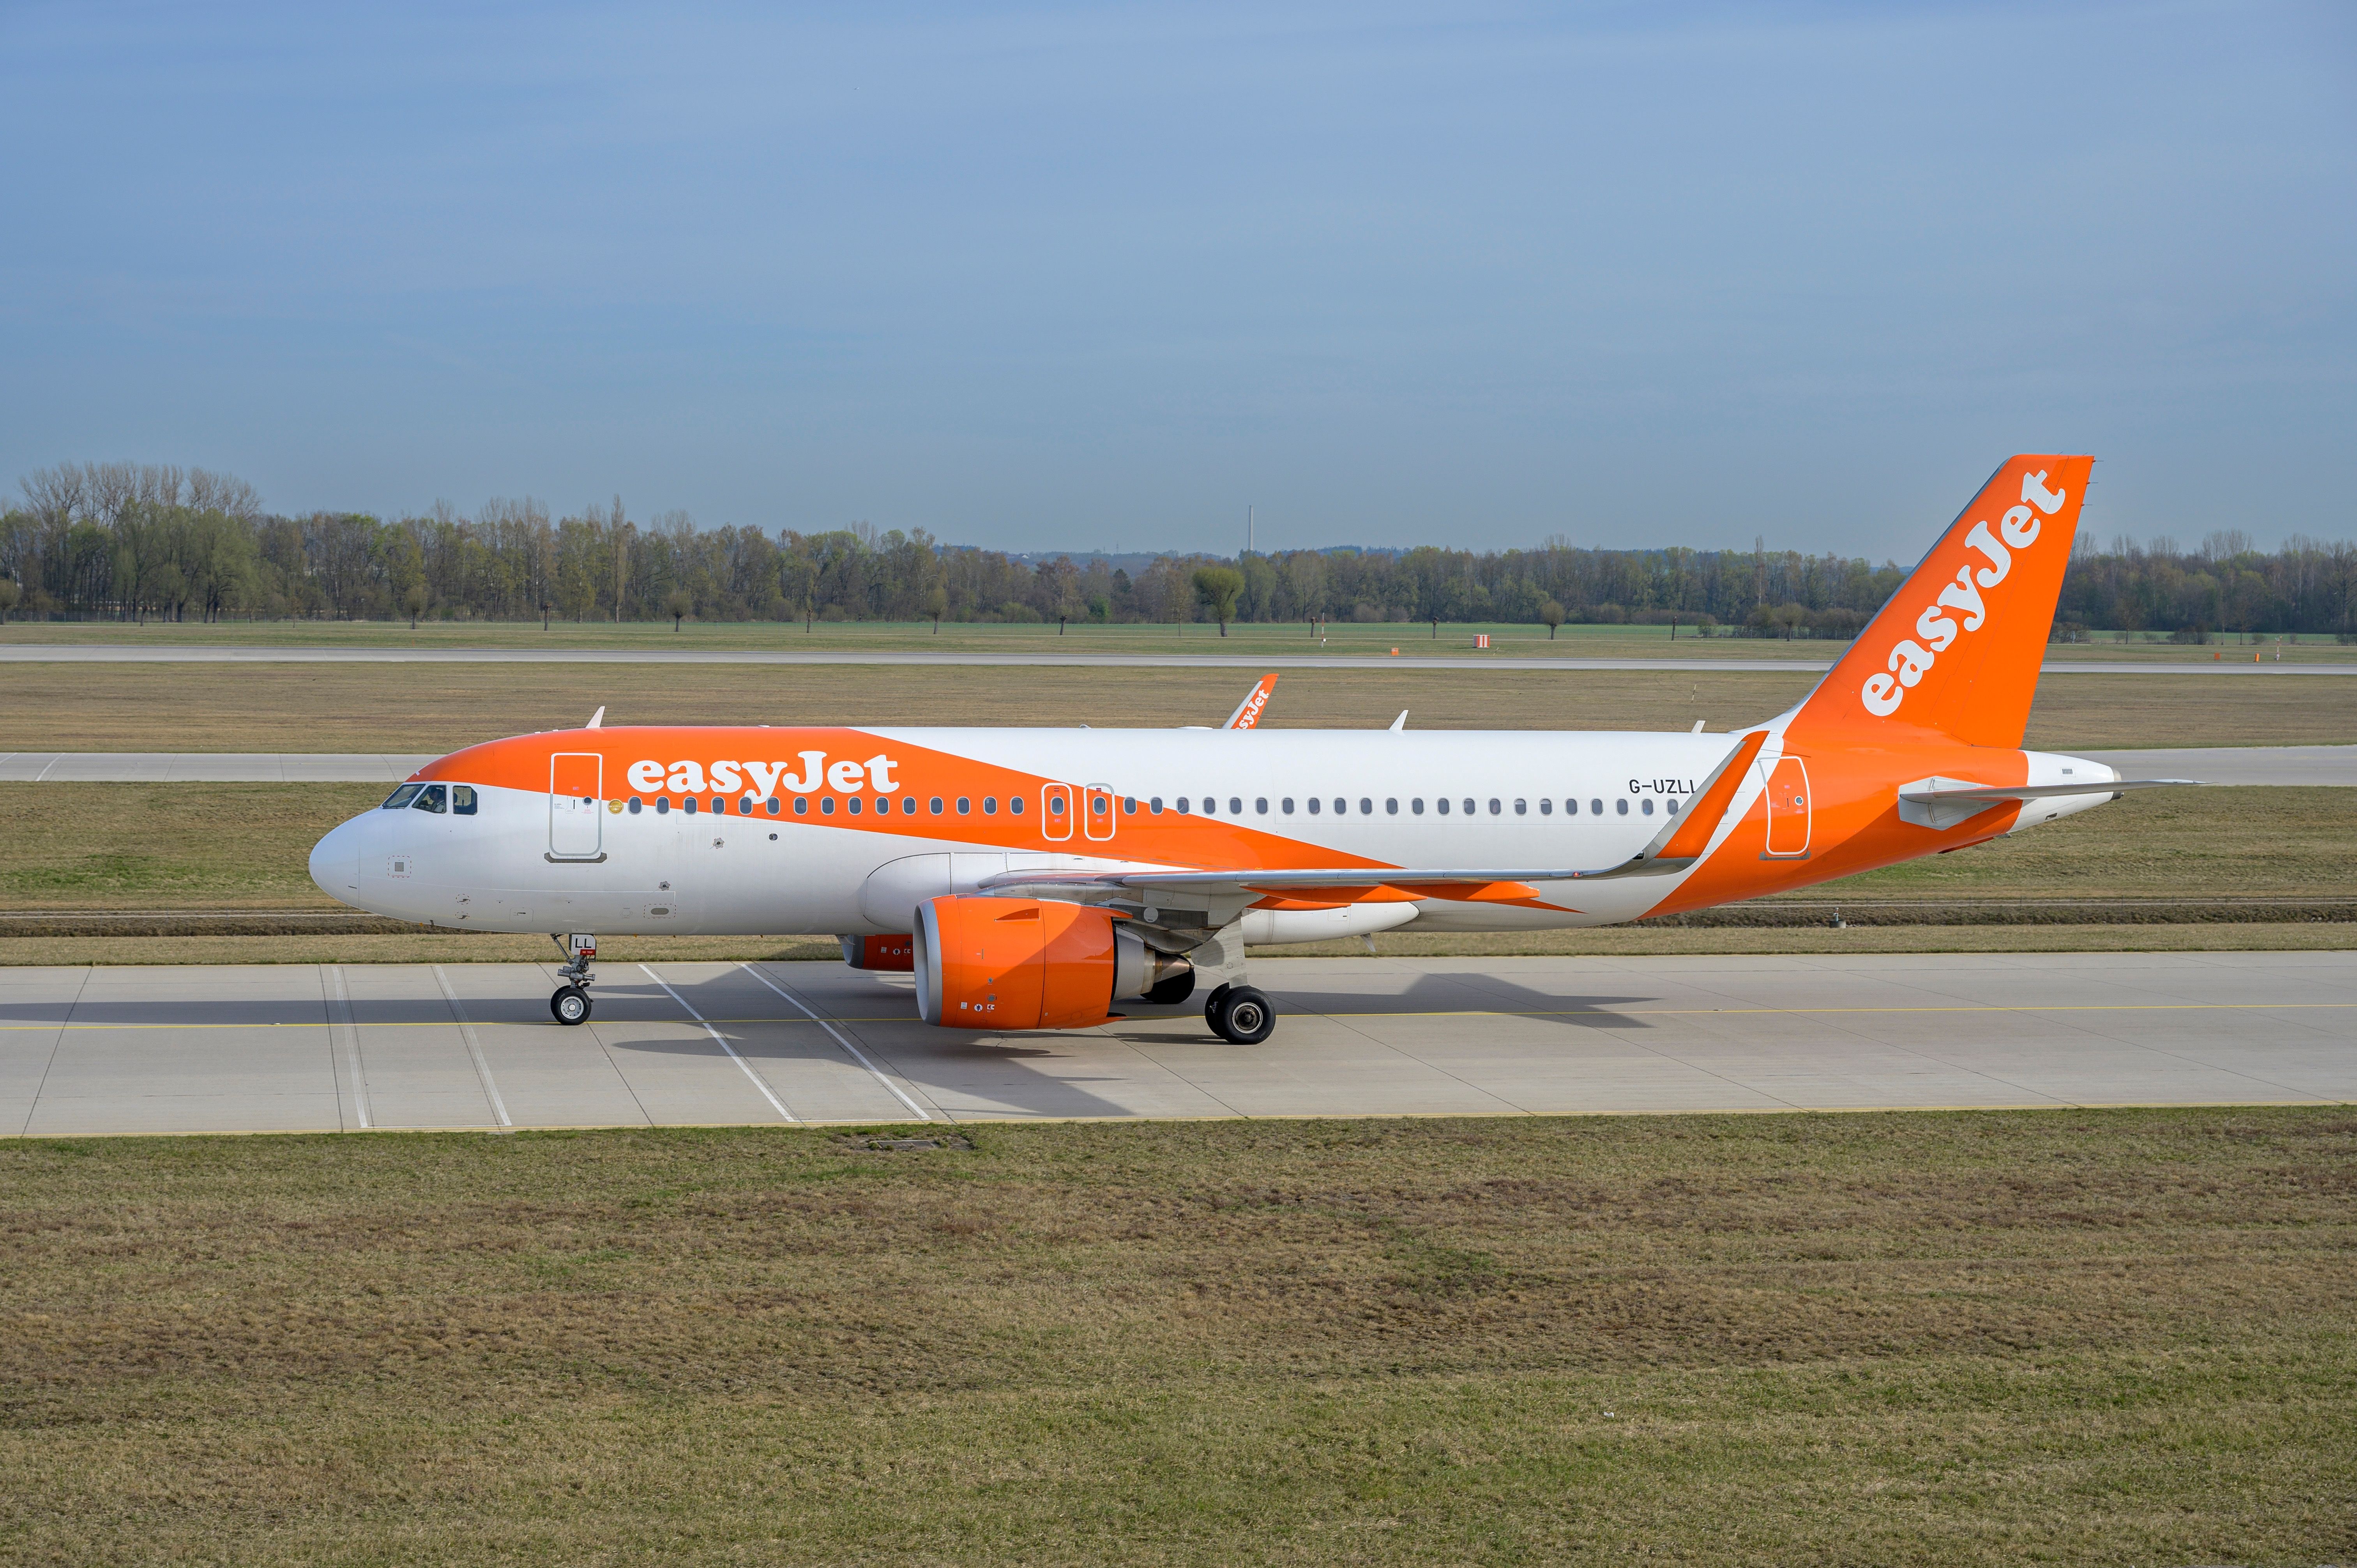 An easyJet Airbus A320-251N with the aircraft registration G-UZLL  is taxiing for take off on the northern runway 08L of Munich Airport MUC 